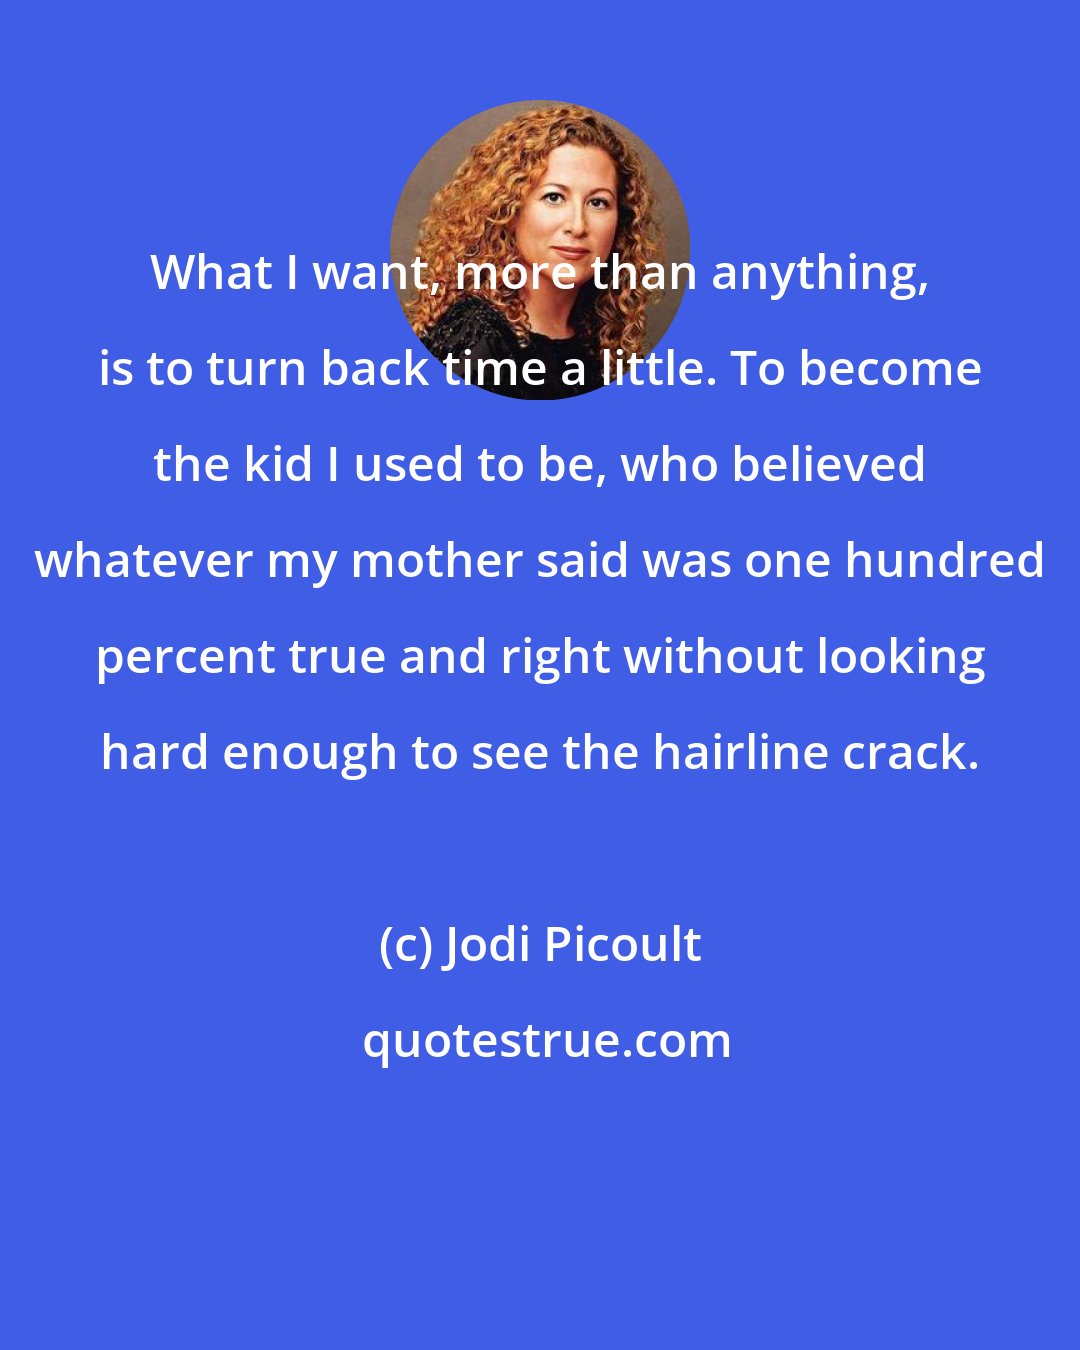 Jodi Picoult: What I want, more than anything, is to turn back time a little. To become the kid I used to be, who believed whatever my mother said was one hundred percent true and right without looking hard enough to see the hairline crack.